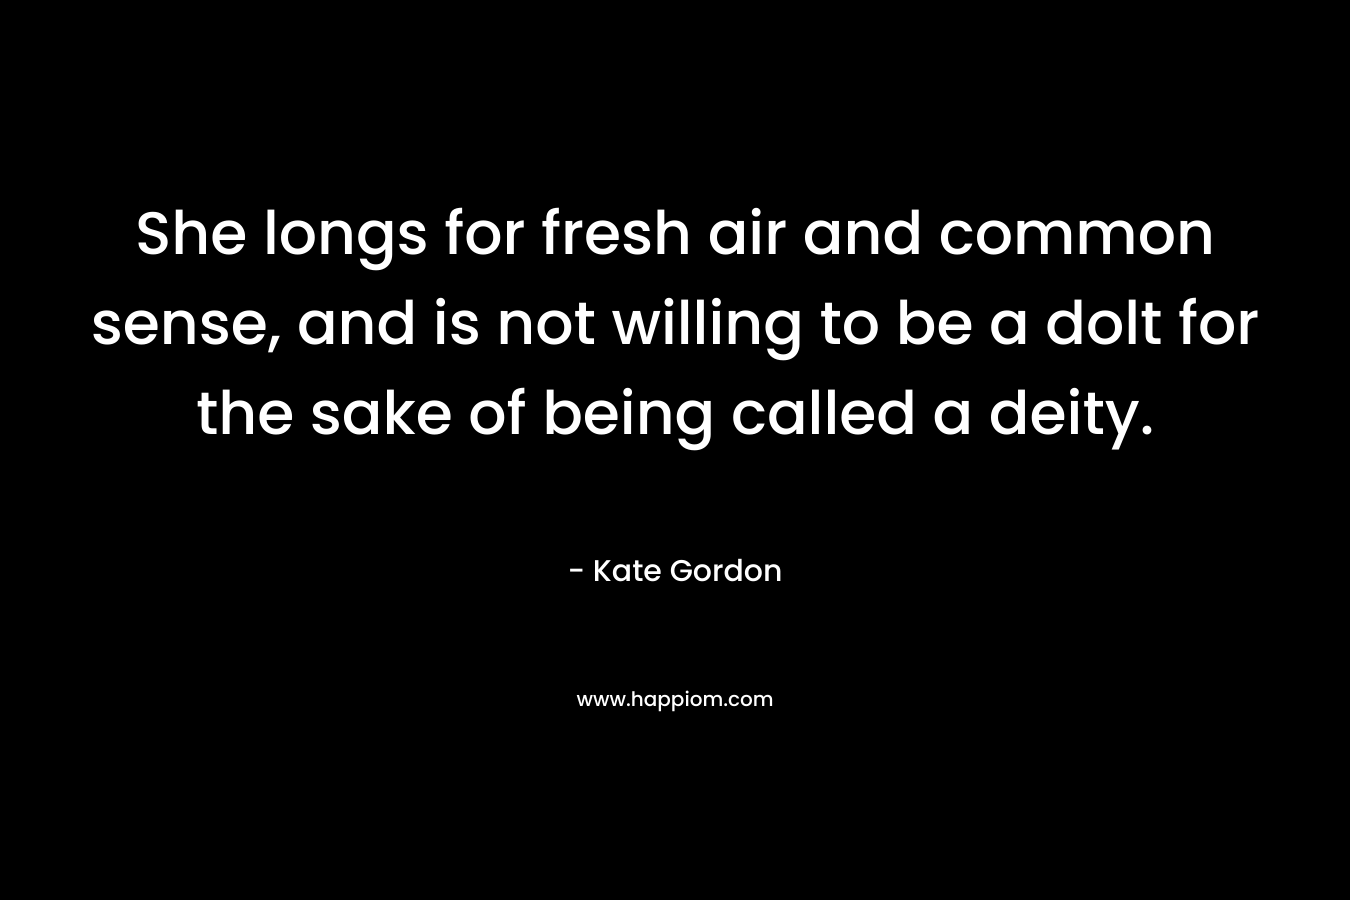 She longs for fresh air and common sense, and is not willing to be a dolt for the sake of being called a deity. – Kate Gordon